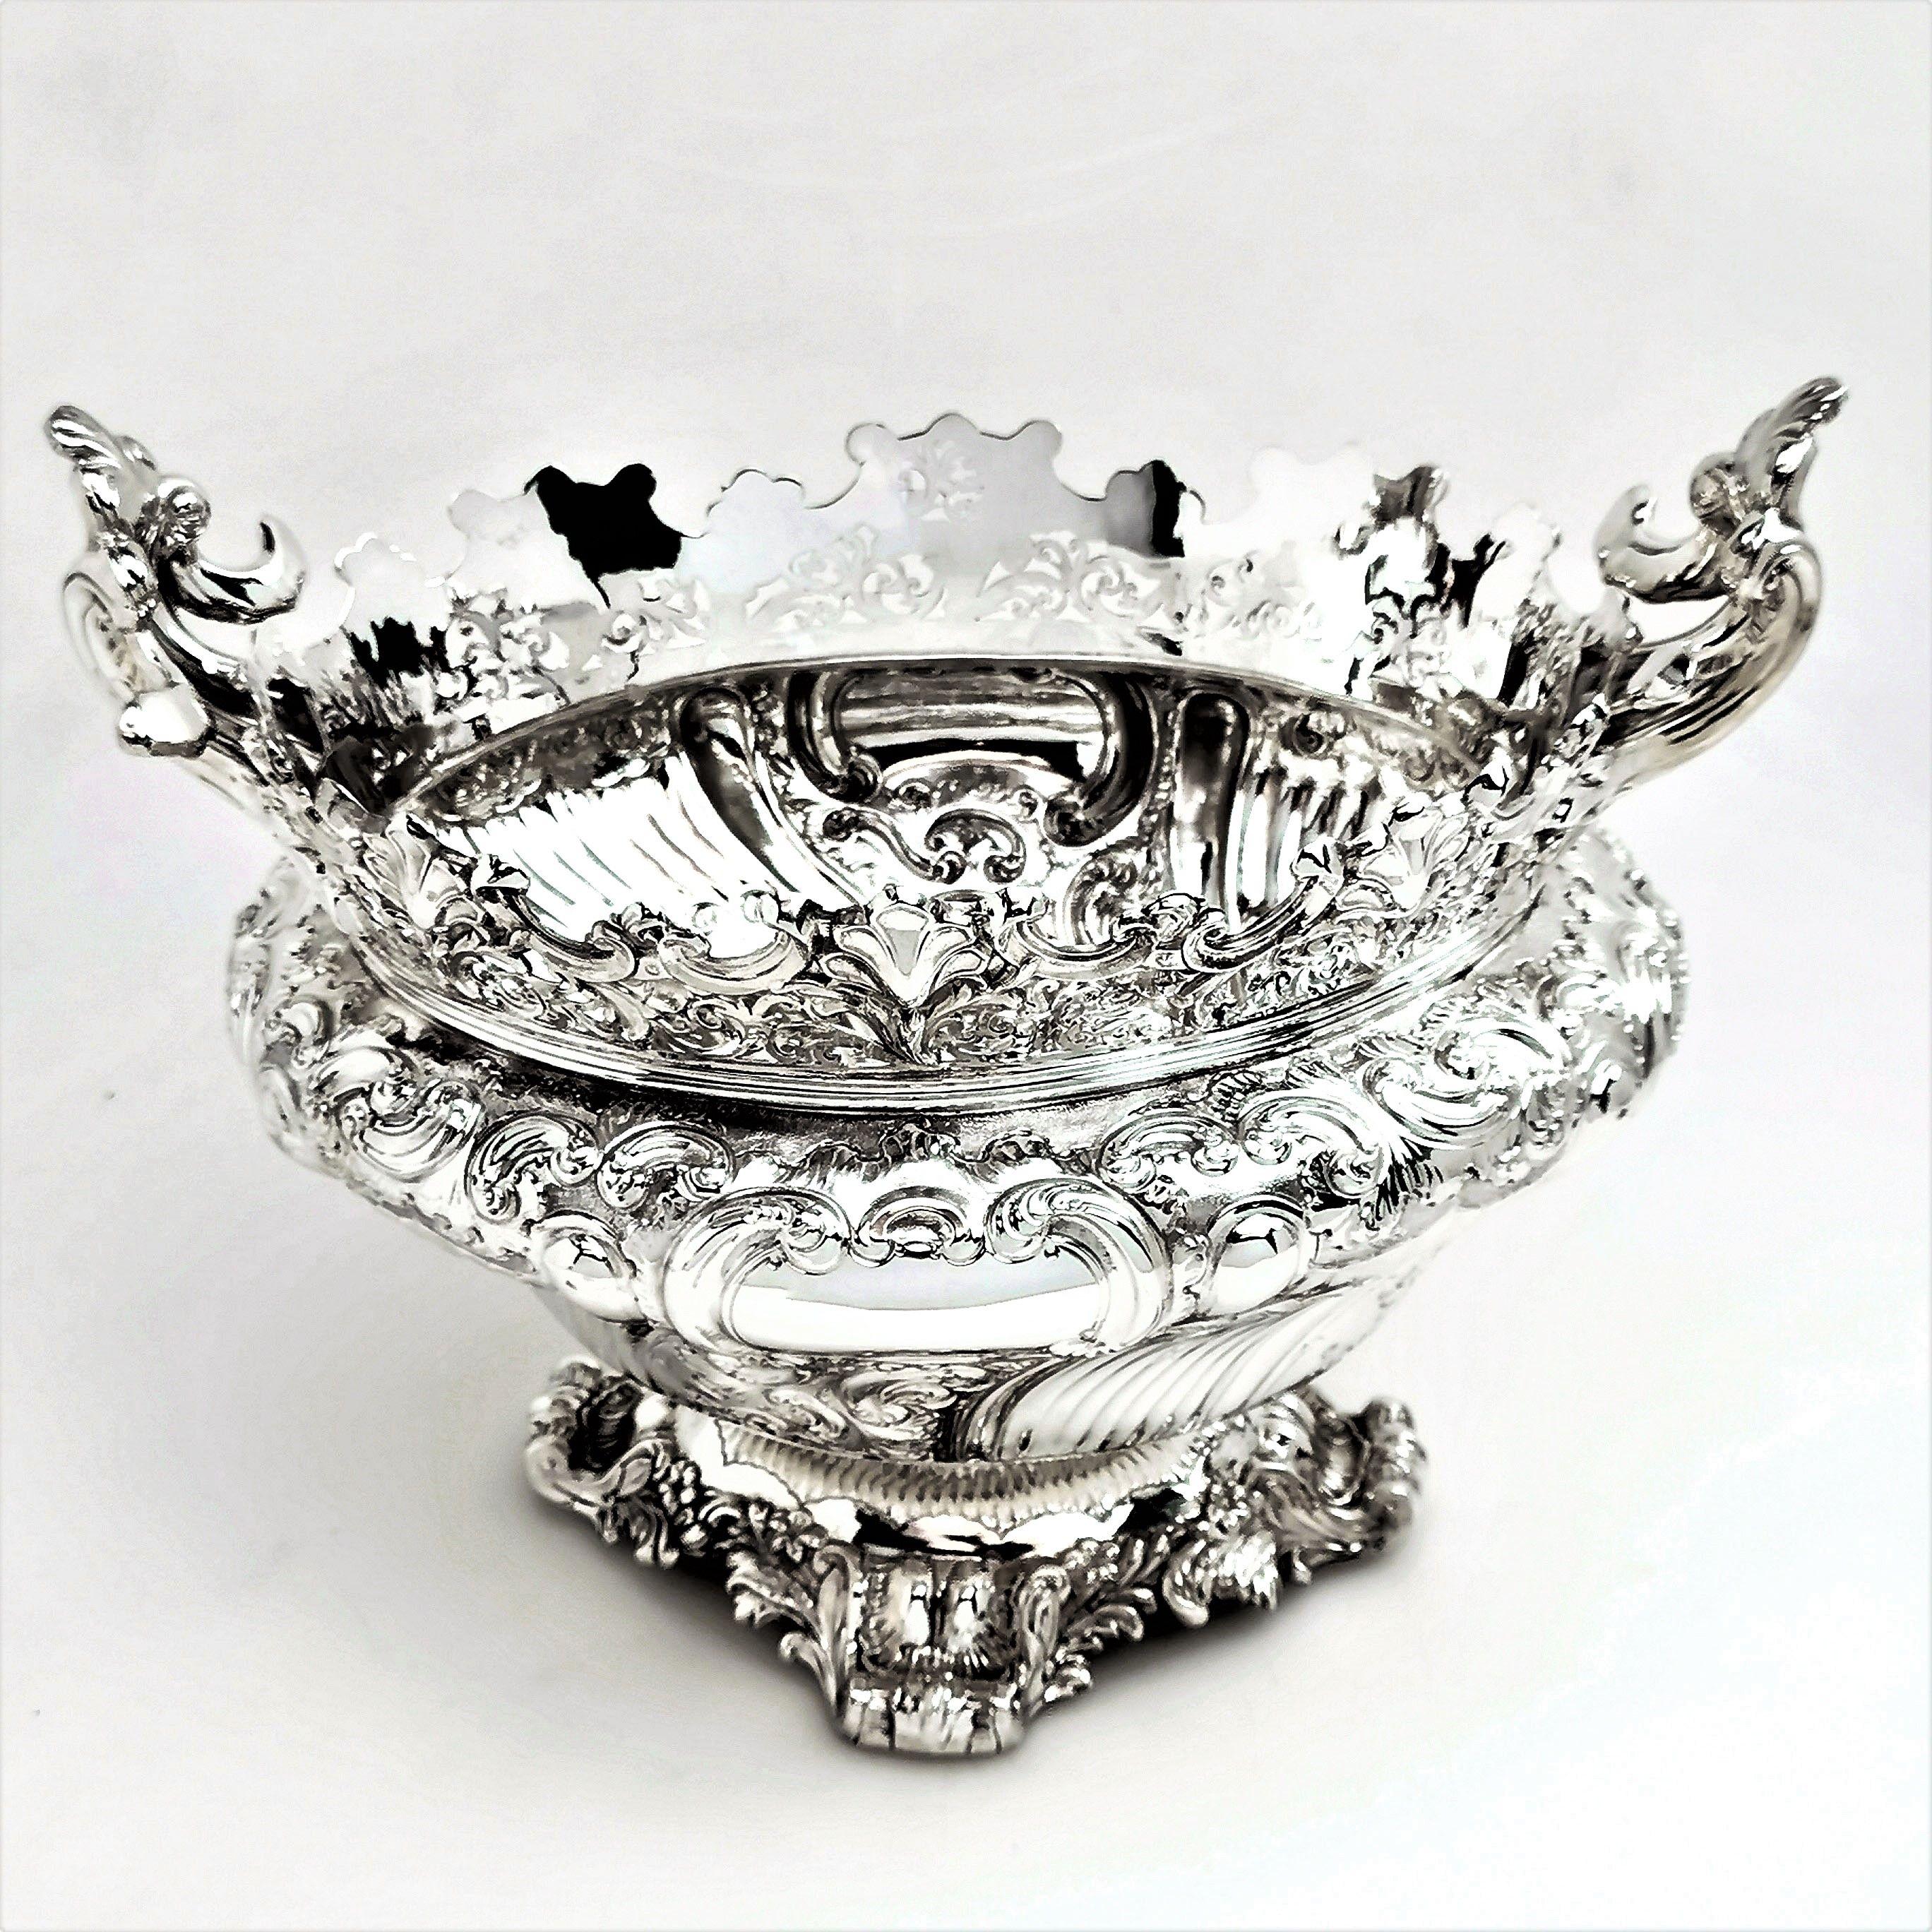 A magnificent antique Victorian solid silver bowl. This bowl is of notably impressive size and suitable for use as a centrepiece or fruit bowl. The dish is a shaped oval and is embellished with a rich chased design covering the body, rim and foot.